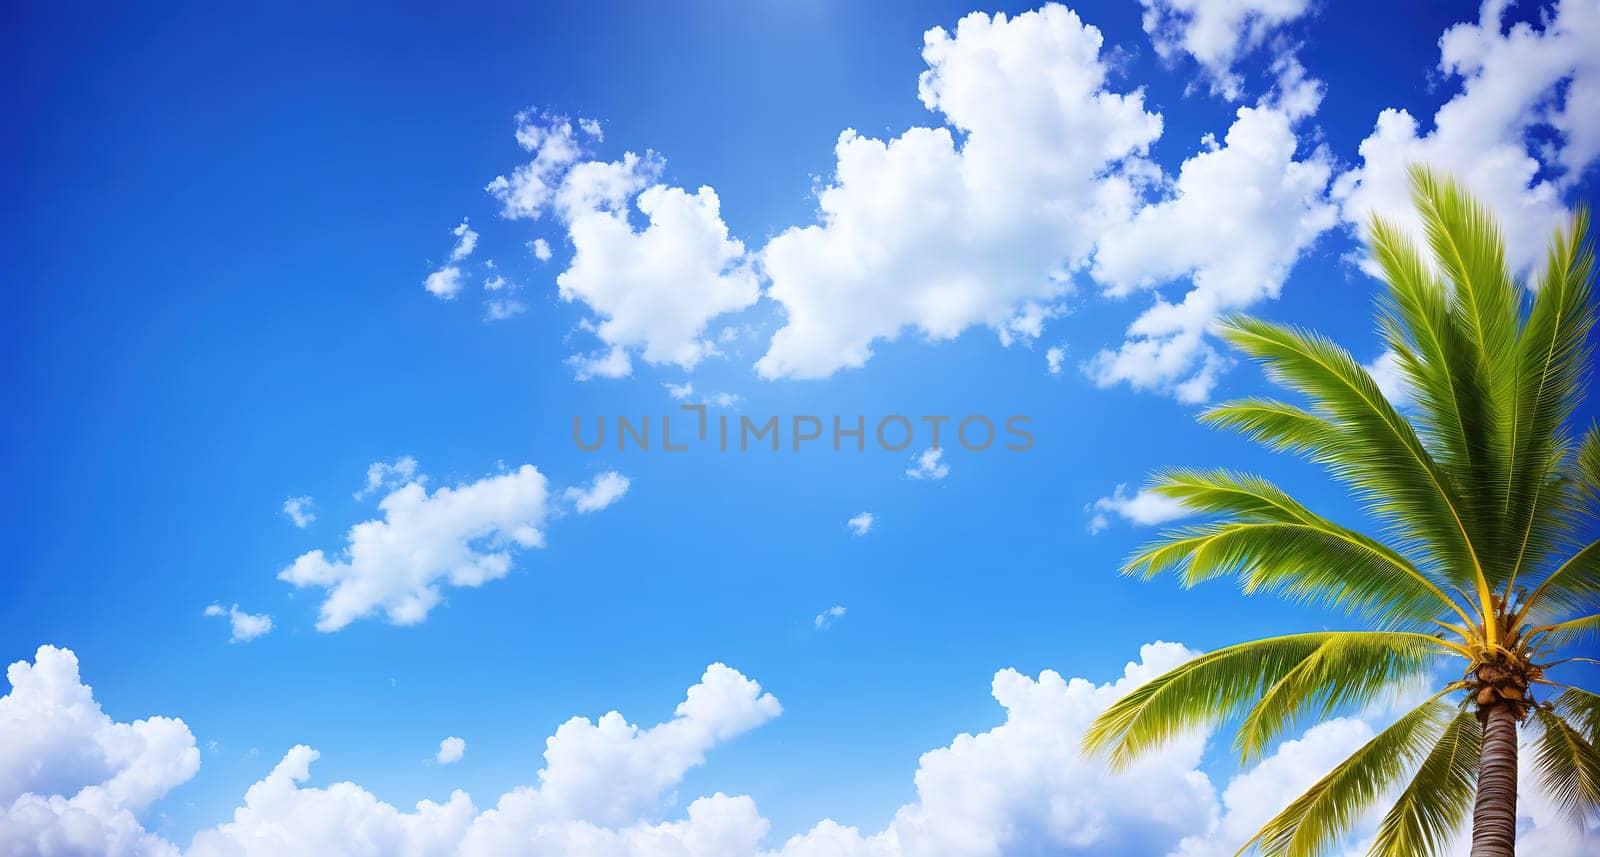 The image shows a palm tree standing on a beach with a clear blue sky in the background.